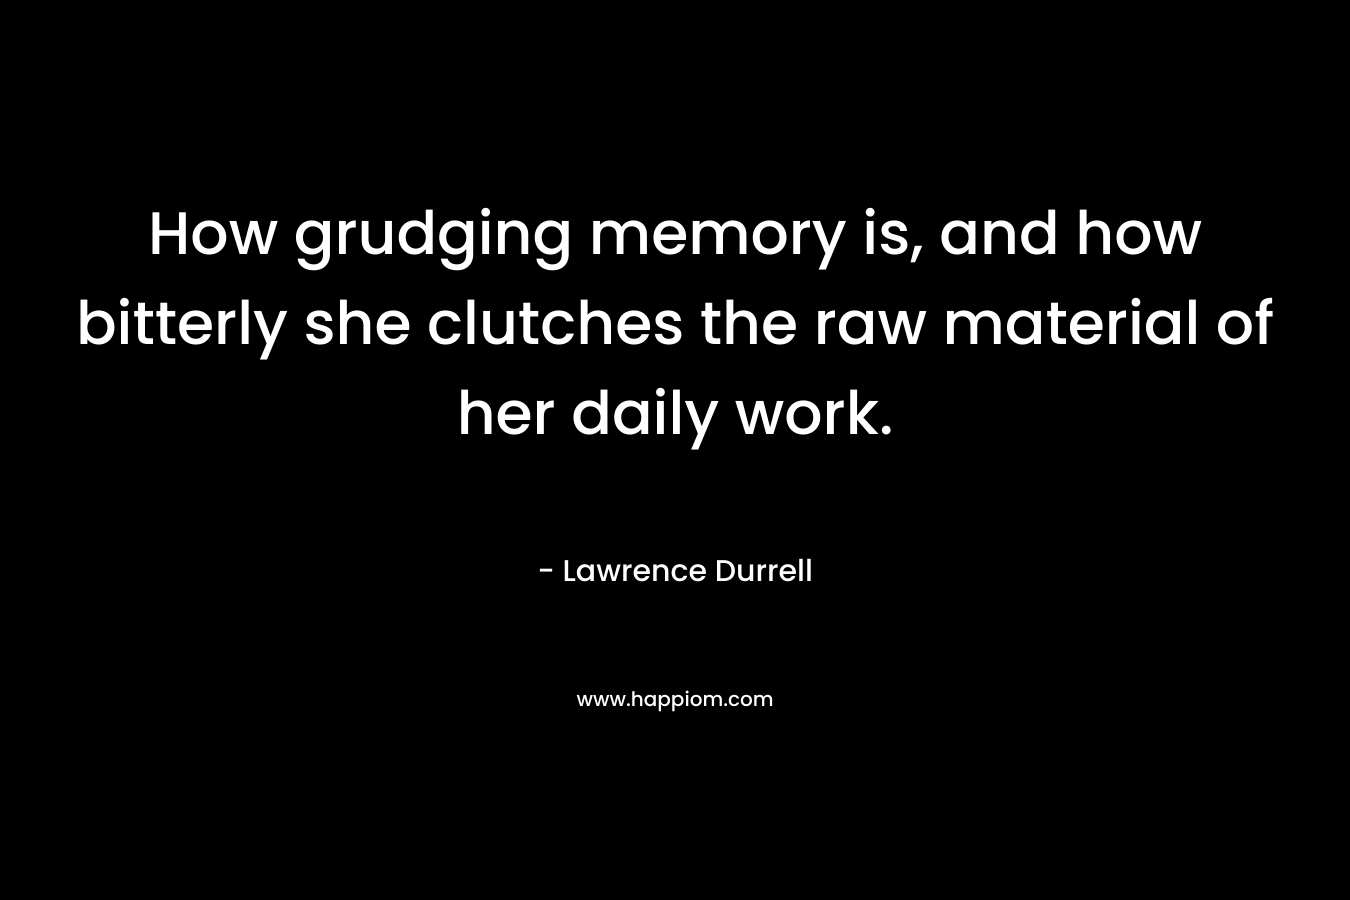 How grudging memory is, and how bitterly she clutches the raw material of her daily work.